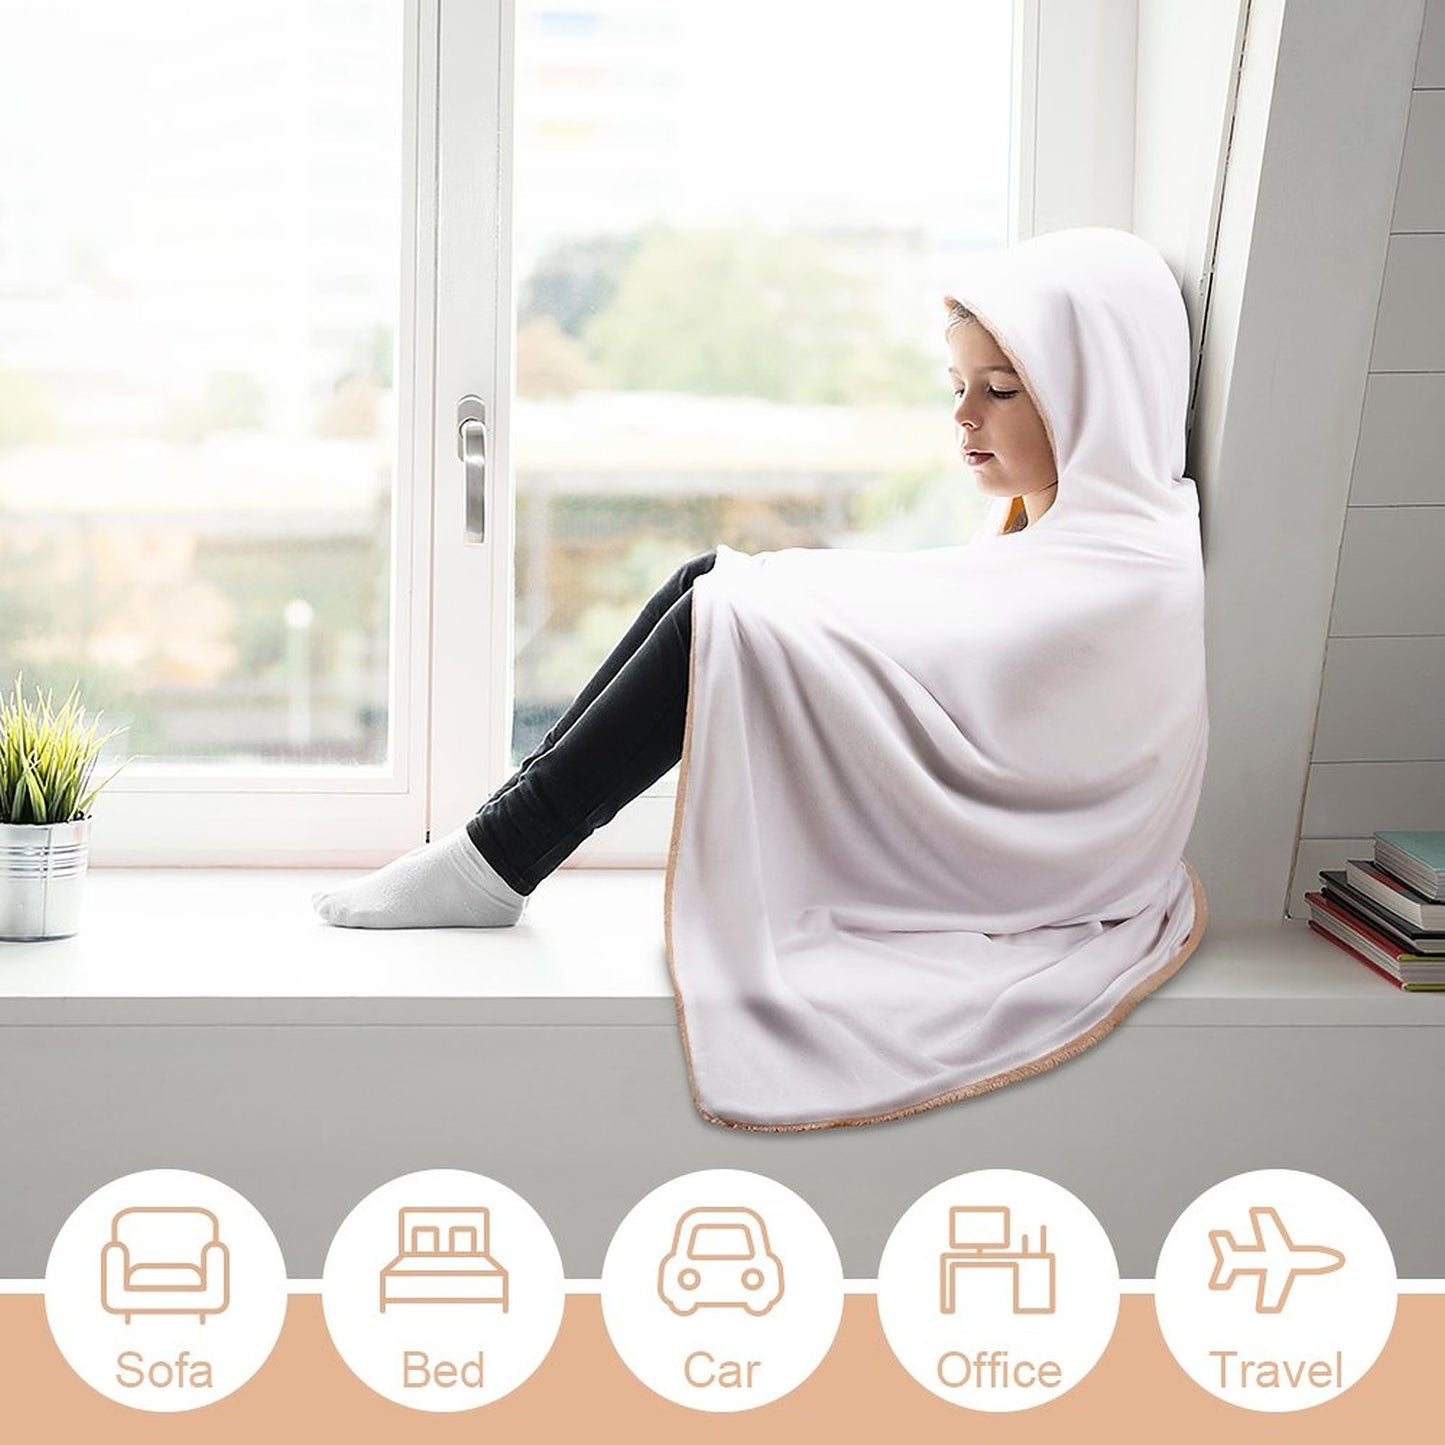 Personalize Your Own Hooded Blanket-60"x80"